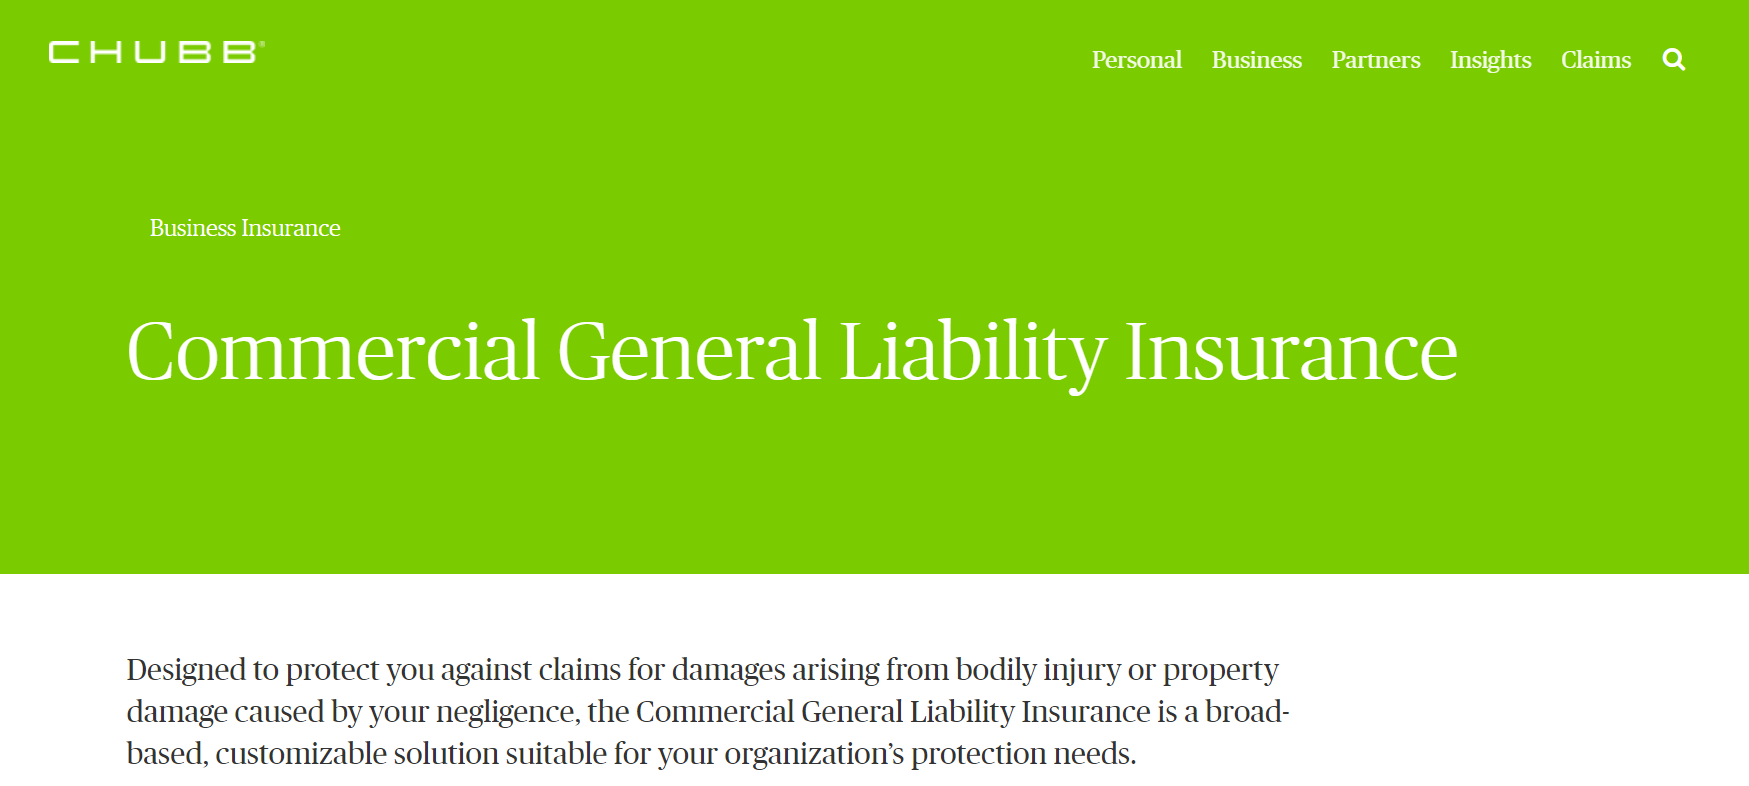 business insurance philippines - chubb commercial general liability